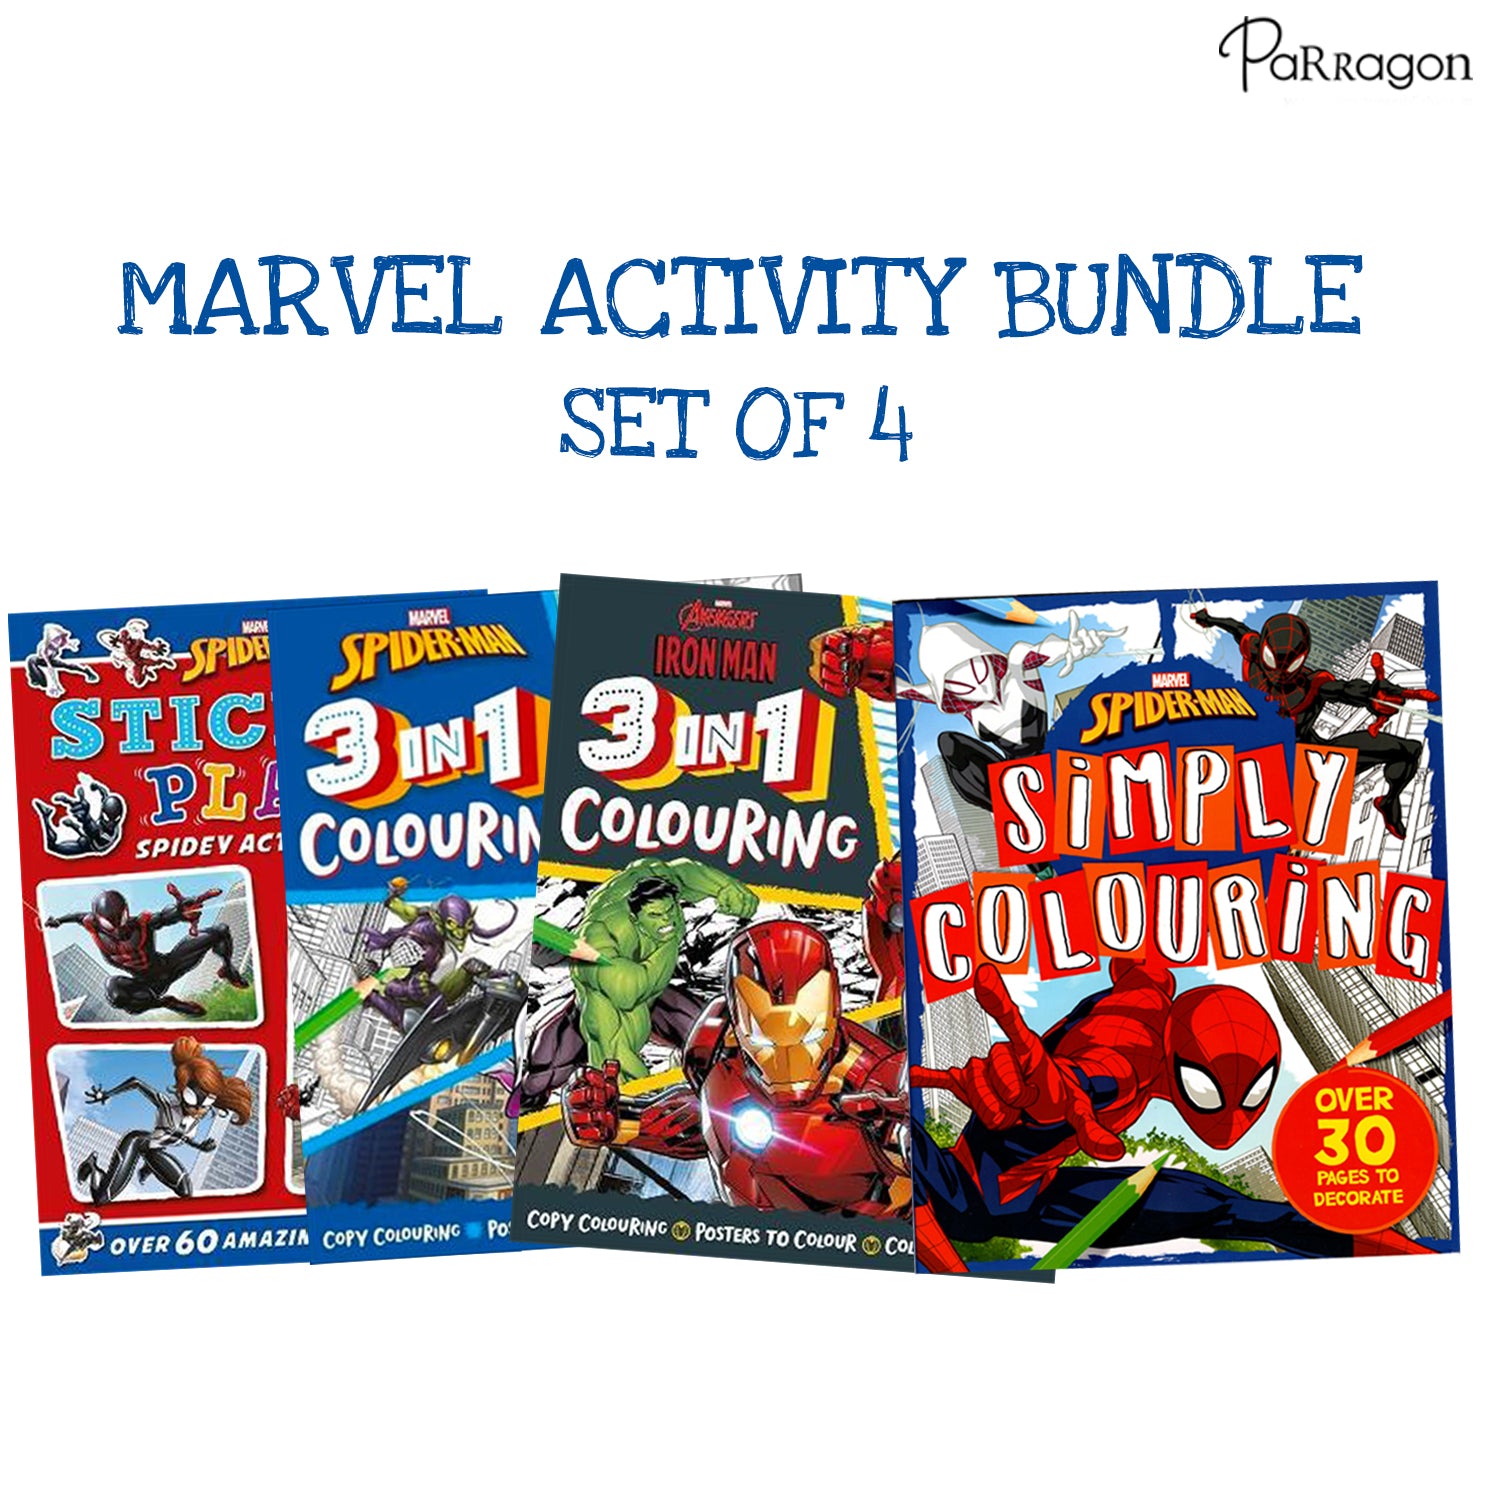 Marvel Activity Bundle Set Of 4 Books Of Iron Man| Spider Man| 3 In 1 Colouring| Sticker Play